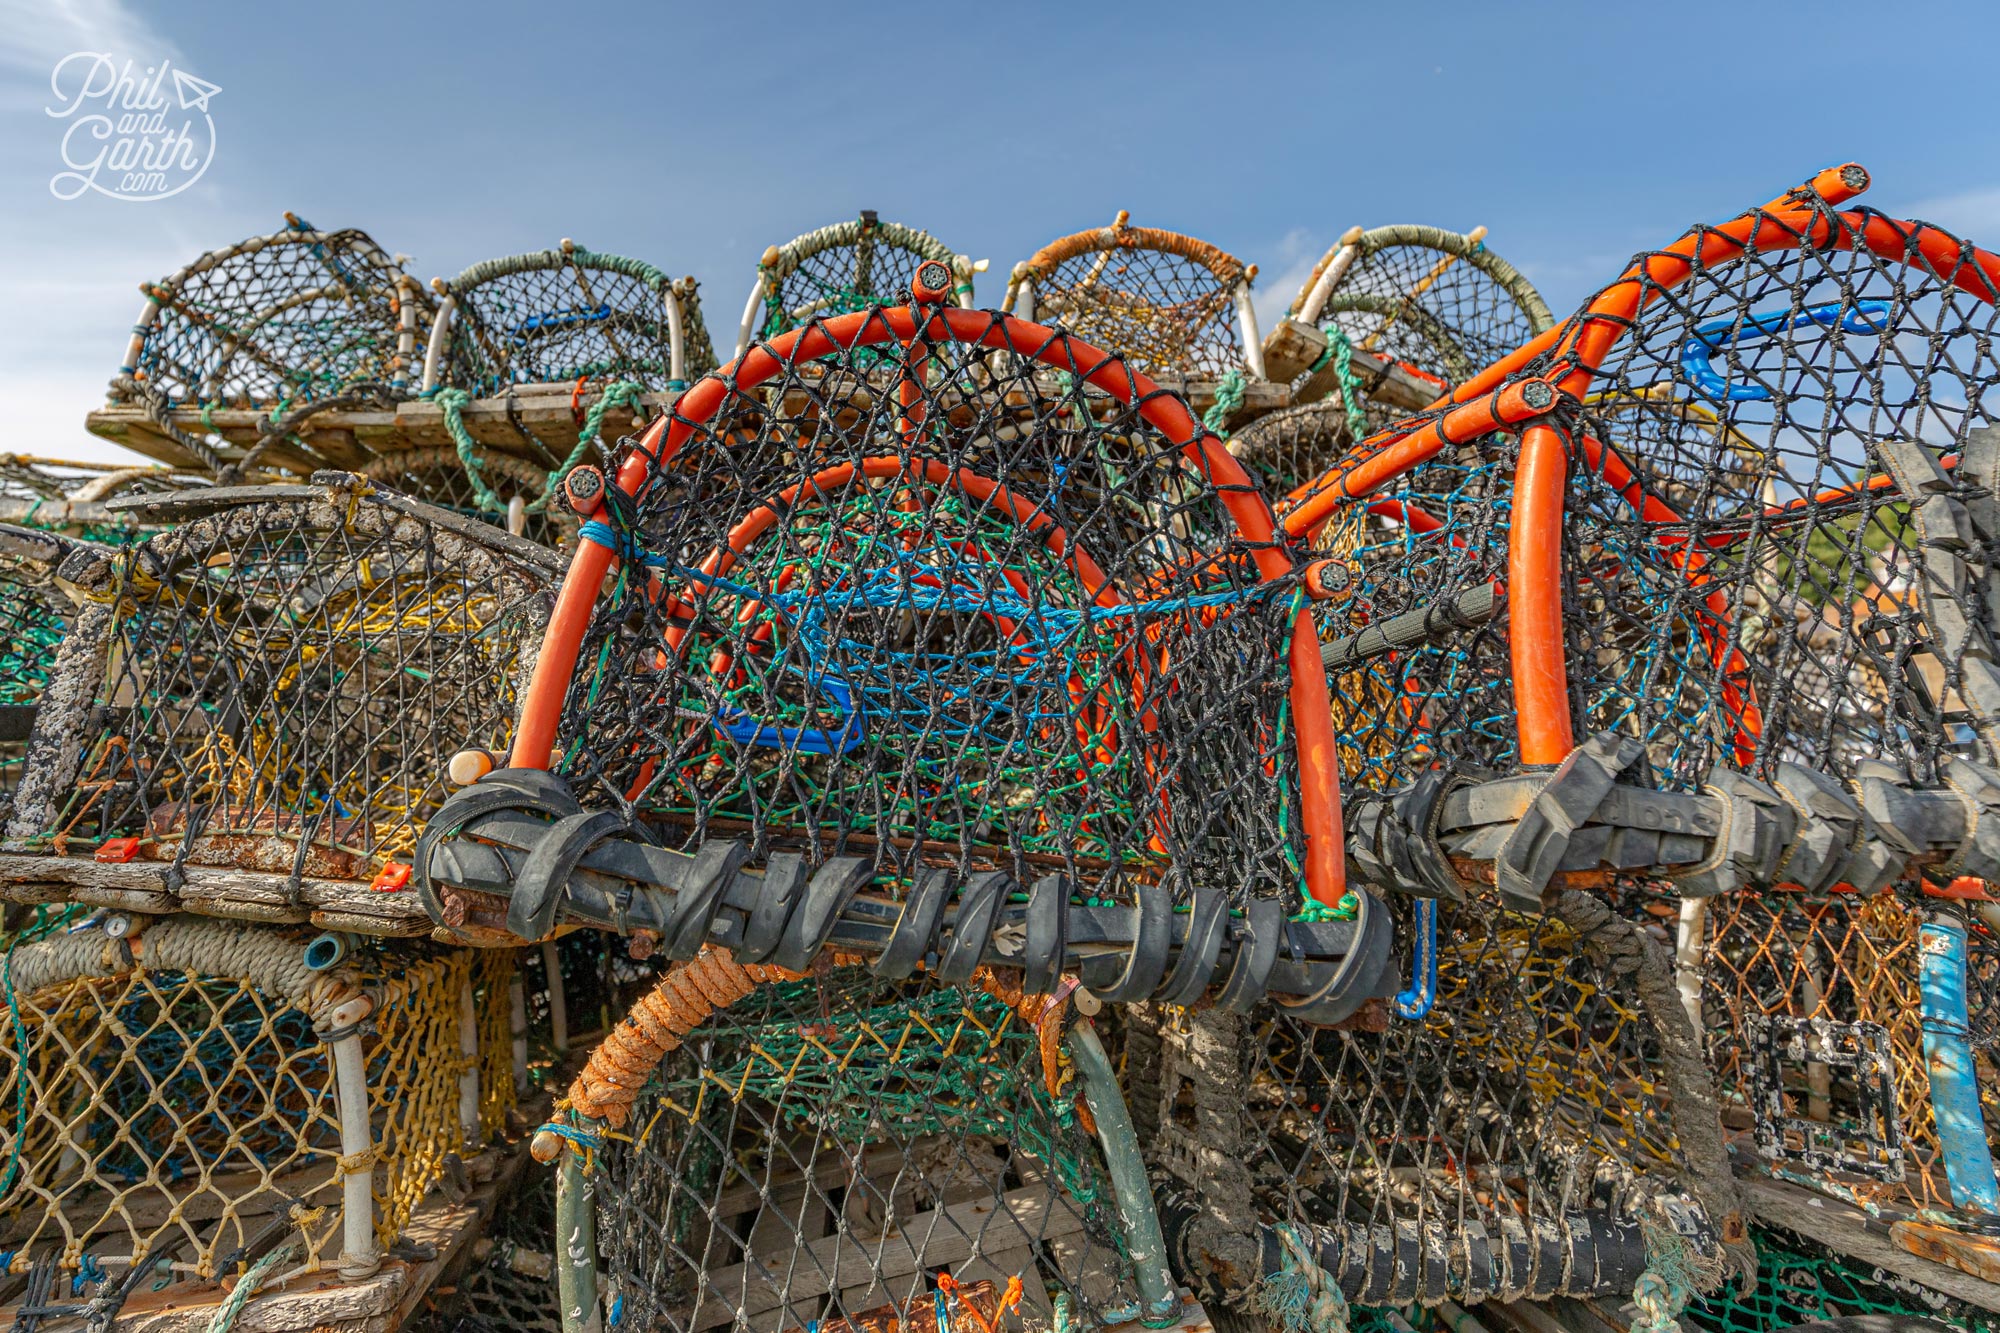 Lobster pots line the harbour, used by fishermen to catch lobsters, crayfish and crabs